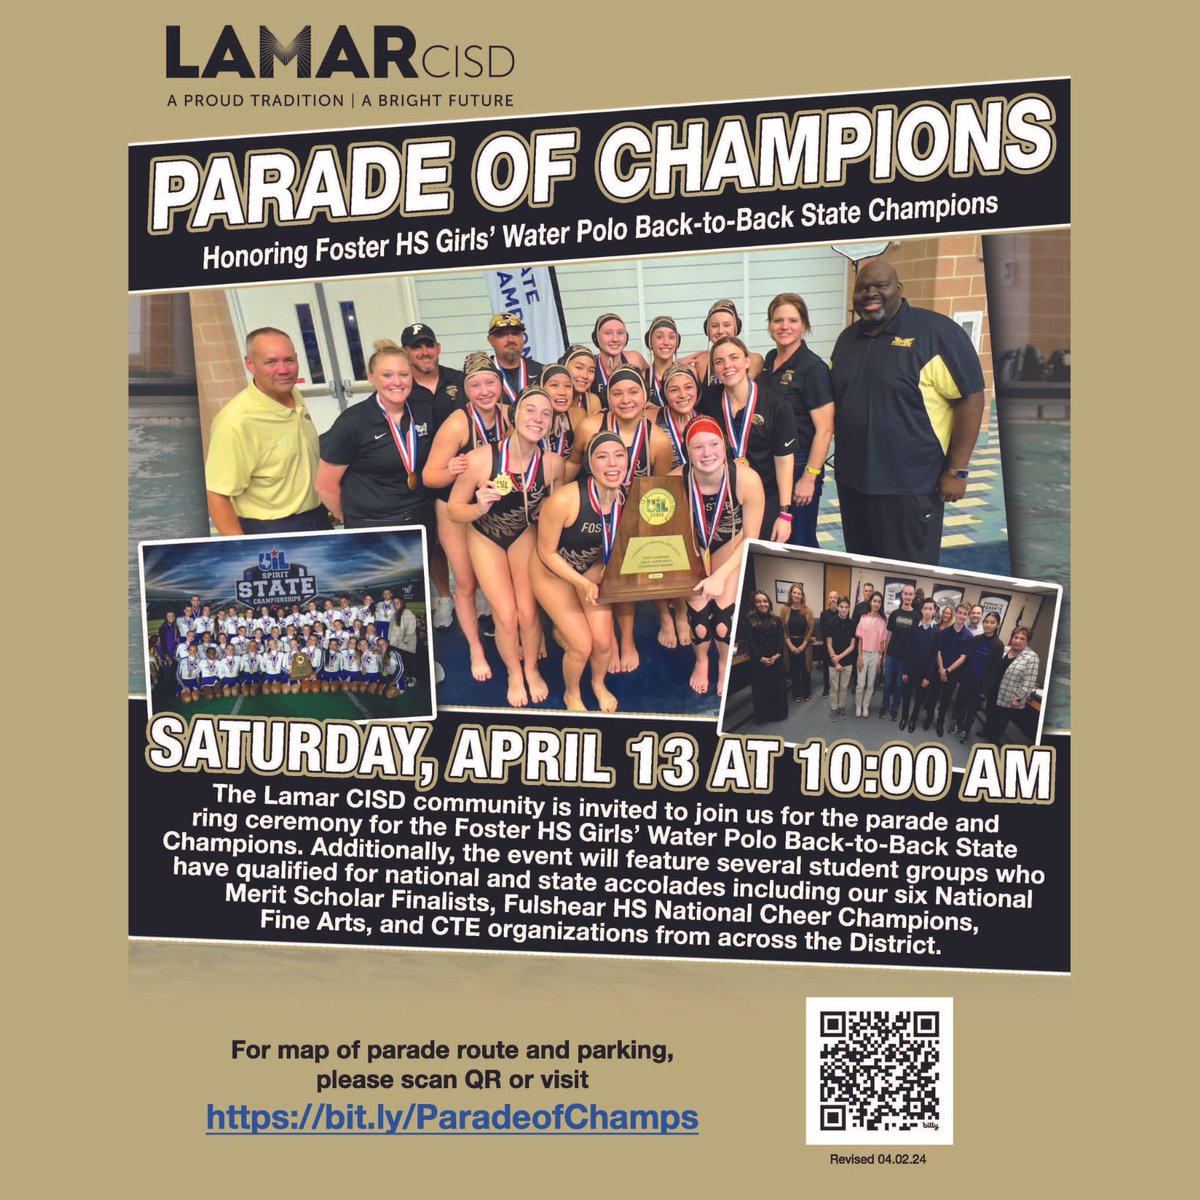 The Parade of Champions is on 4/13 at 10 AM. Join us as we’ll be honoring the Foster HS Girls’ Water Polo team for their back-to-back state championship & many student organizations within the District who have qualified for state and nationals.🎉 🔗 lcisd.org/news